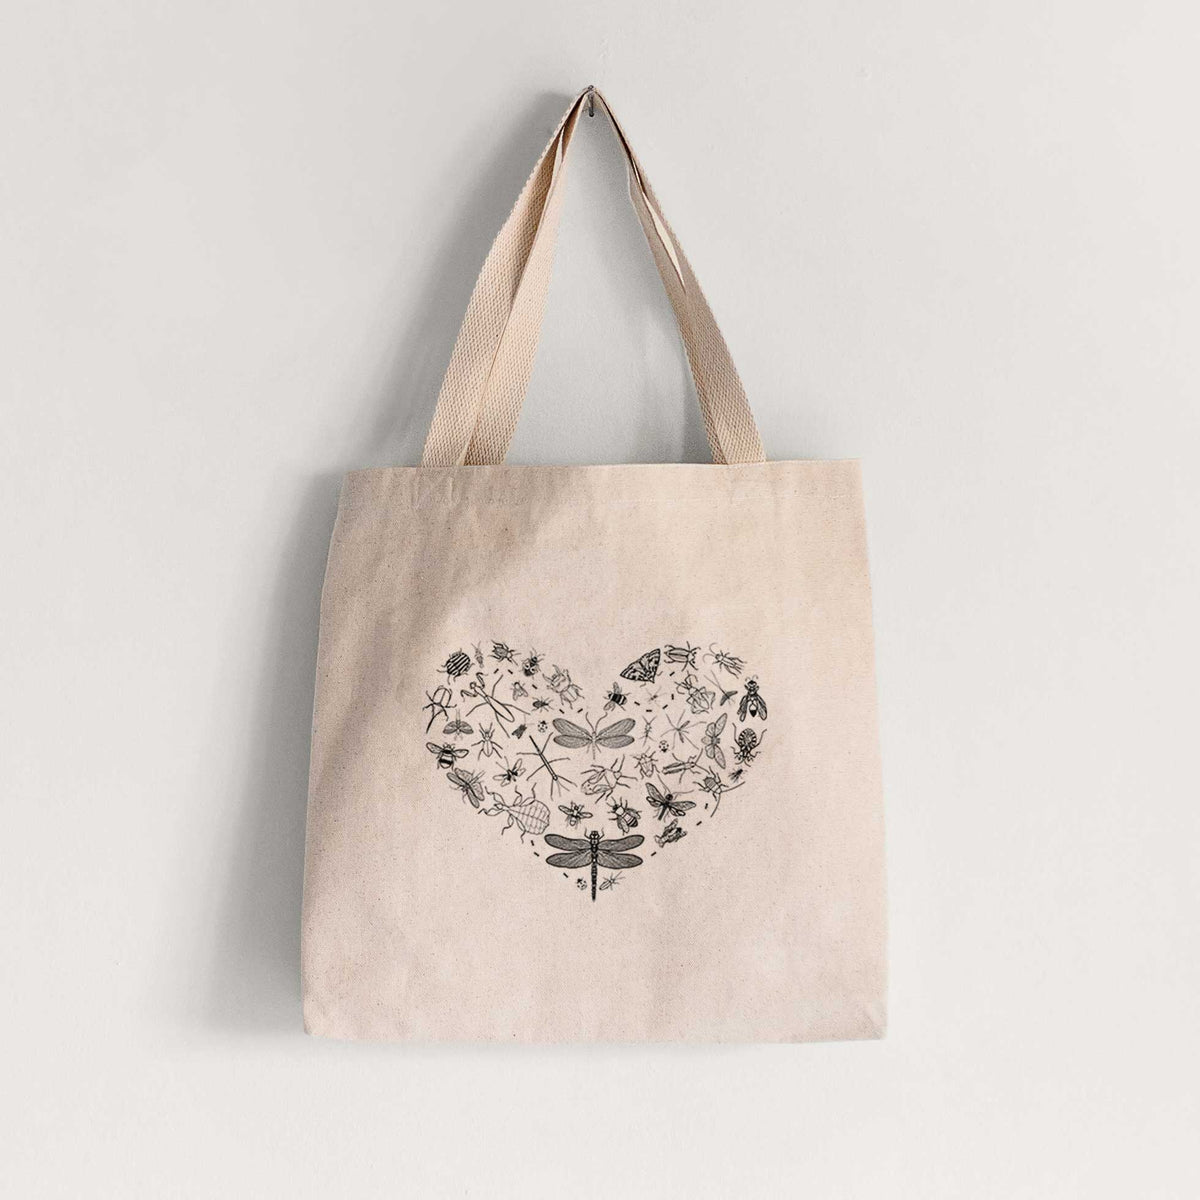 Heart Full of Insects - Tote Bag